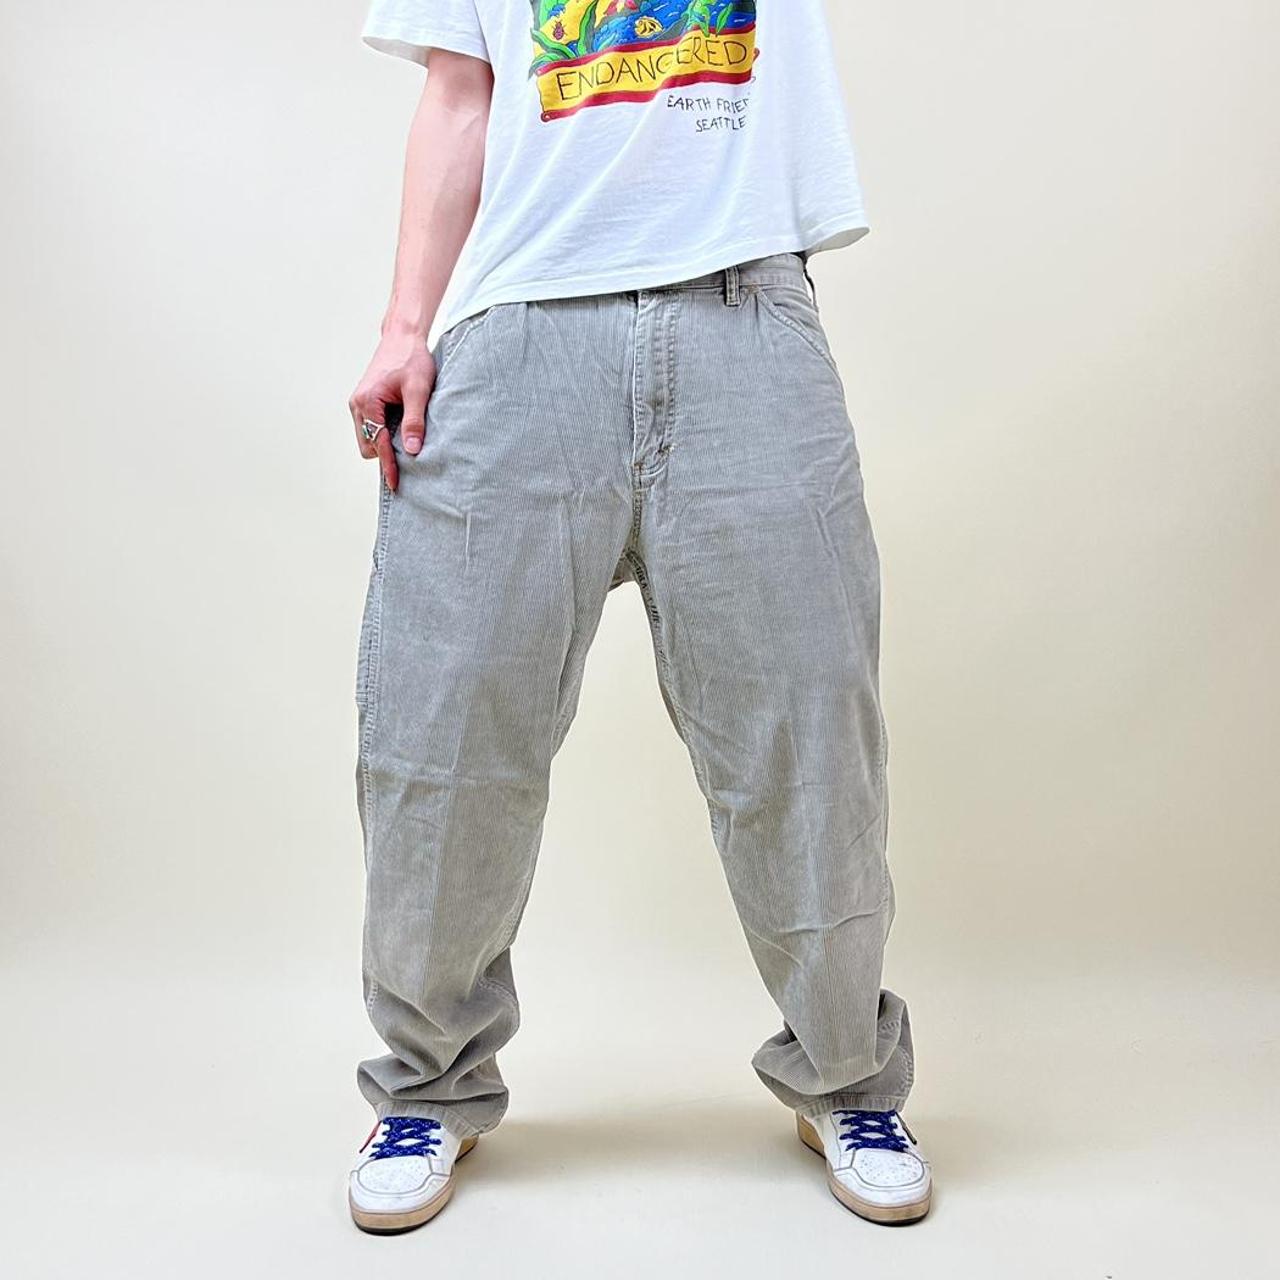 Affordable hip hop pants For Sale  Mens Fashion  Carousell Malaysia